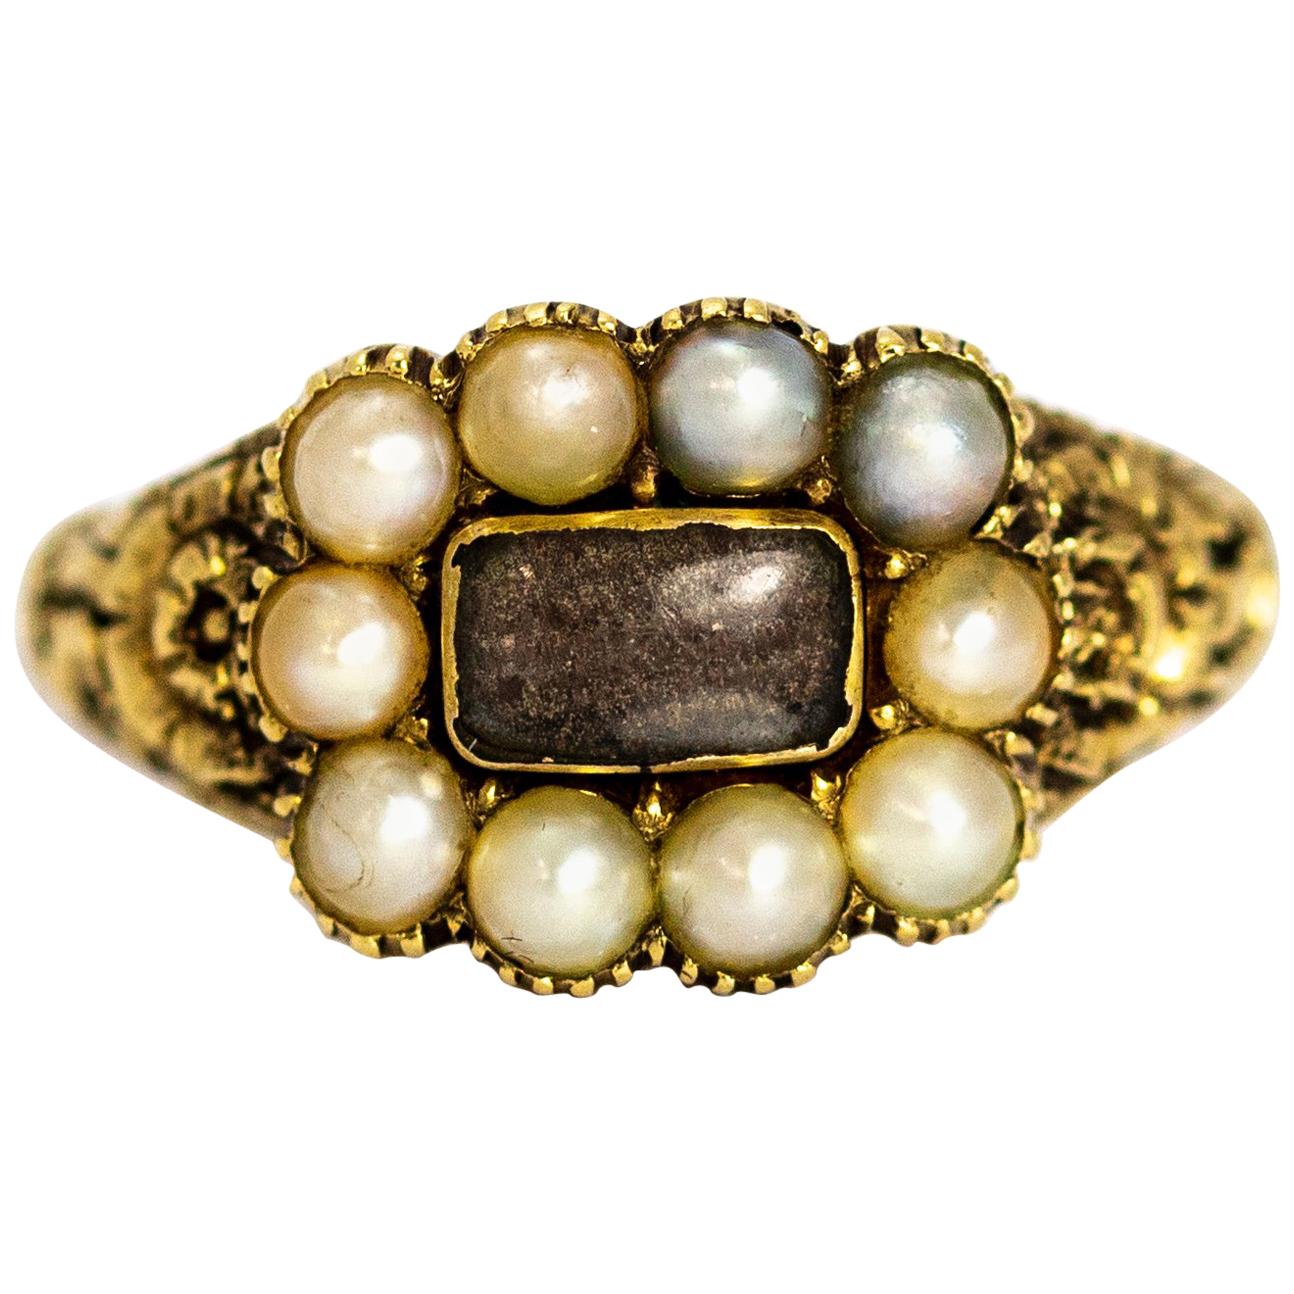 What is a mourning ring used for?